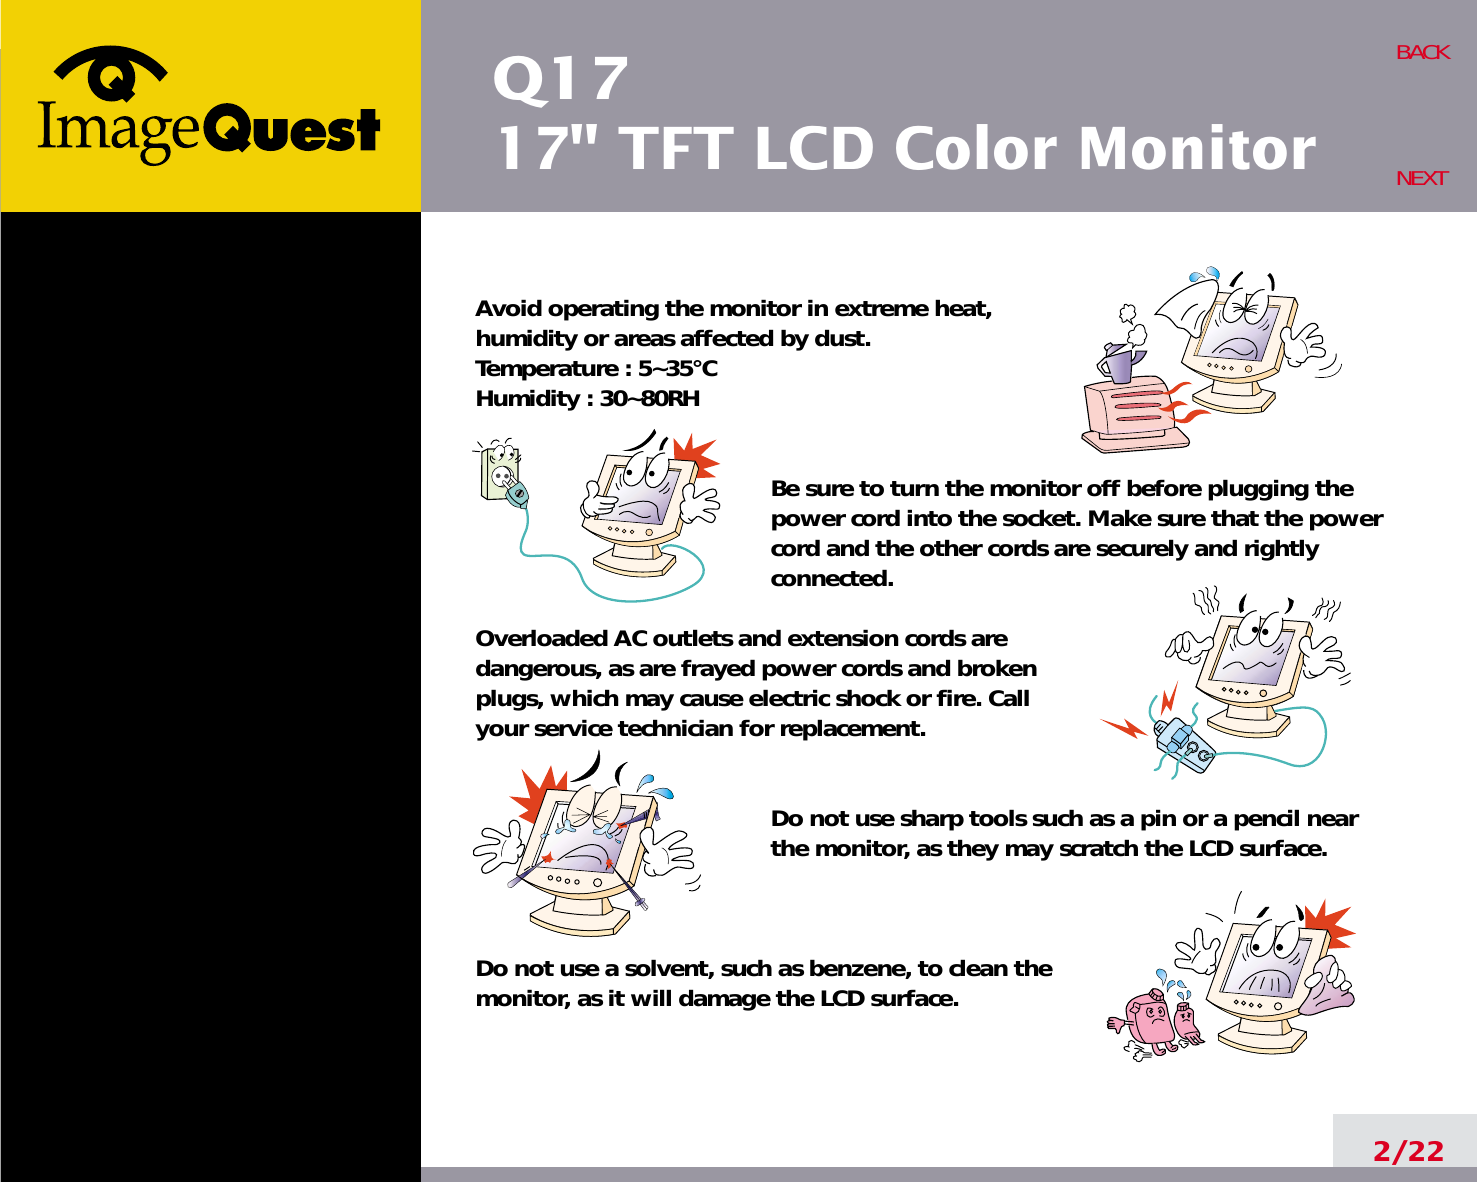 Q1717&quot; TFT LCD Color Monitor2/22BACKNEXTAvoid operating the monitor in extreme heat, humidity or areas affected by dust. Temperature : 5~35°CHumidity : 30~80RH Be sure to turn the monitor off before plugging thepower cord into the socket. Make sure that the powercord and the other cords are securely and rightlyconnected.Overloaded AC outlets and extension cords are dangerous, as are frayed power cords and broken plugs, which may cause electric shock or fire. Call your service technician for replacement.Do not use sharp tools such as a pin or a pencil near the monitor, as they may scratch the LCD surface.Do not use a solvent, such as benzene, to clean the monitor, as it will damage the LCD surface.